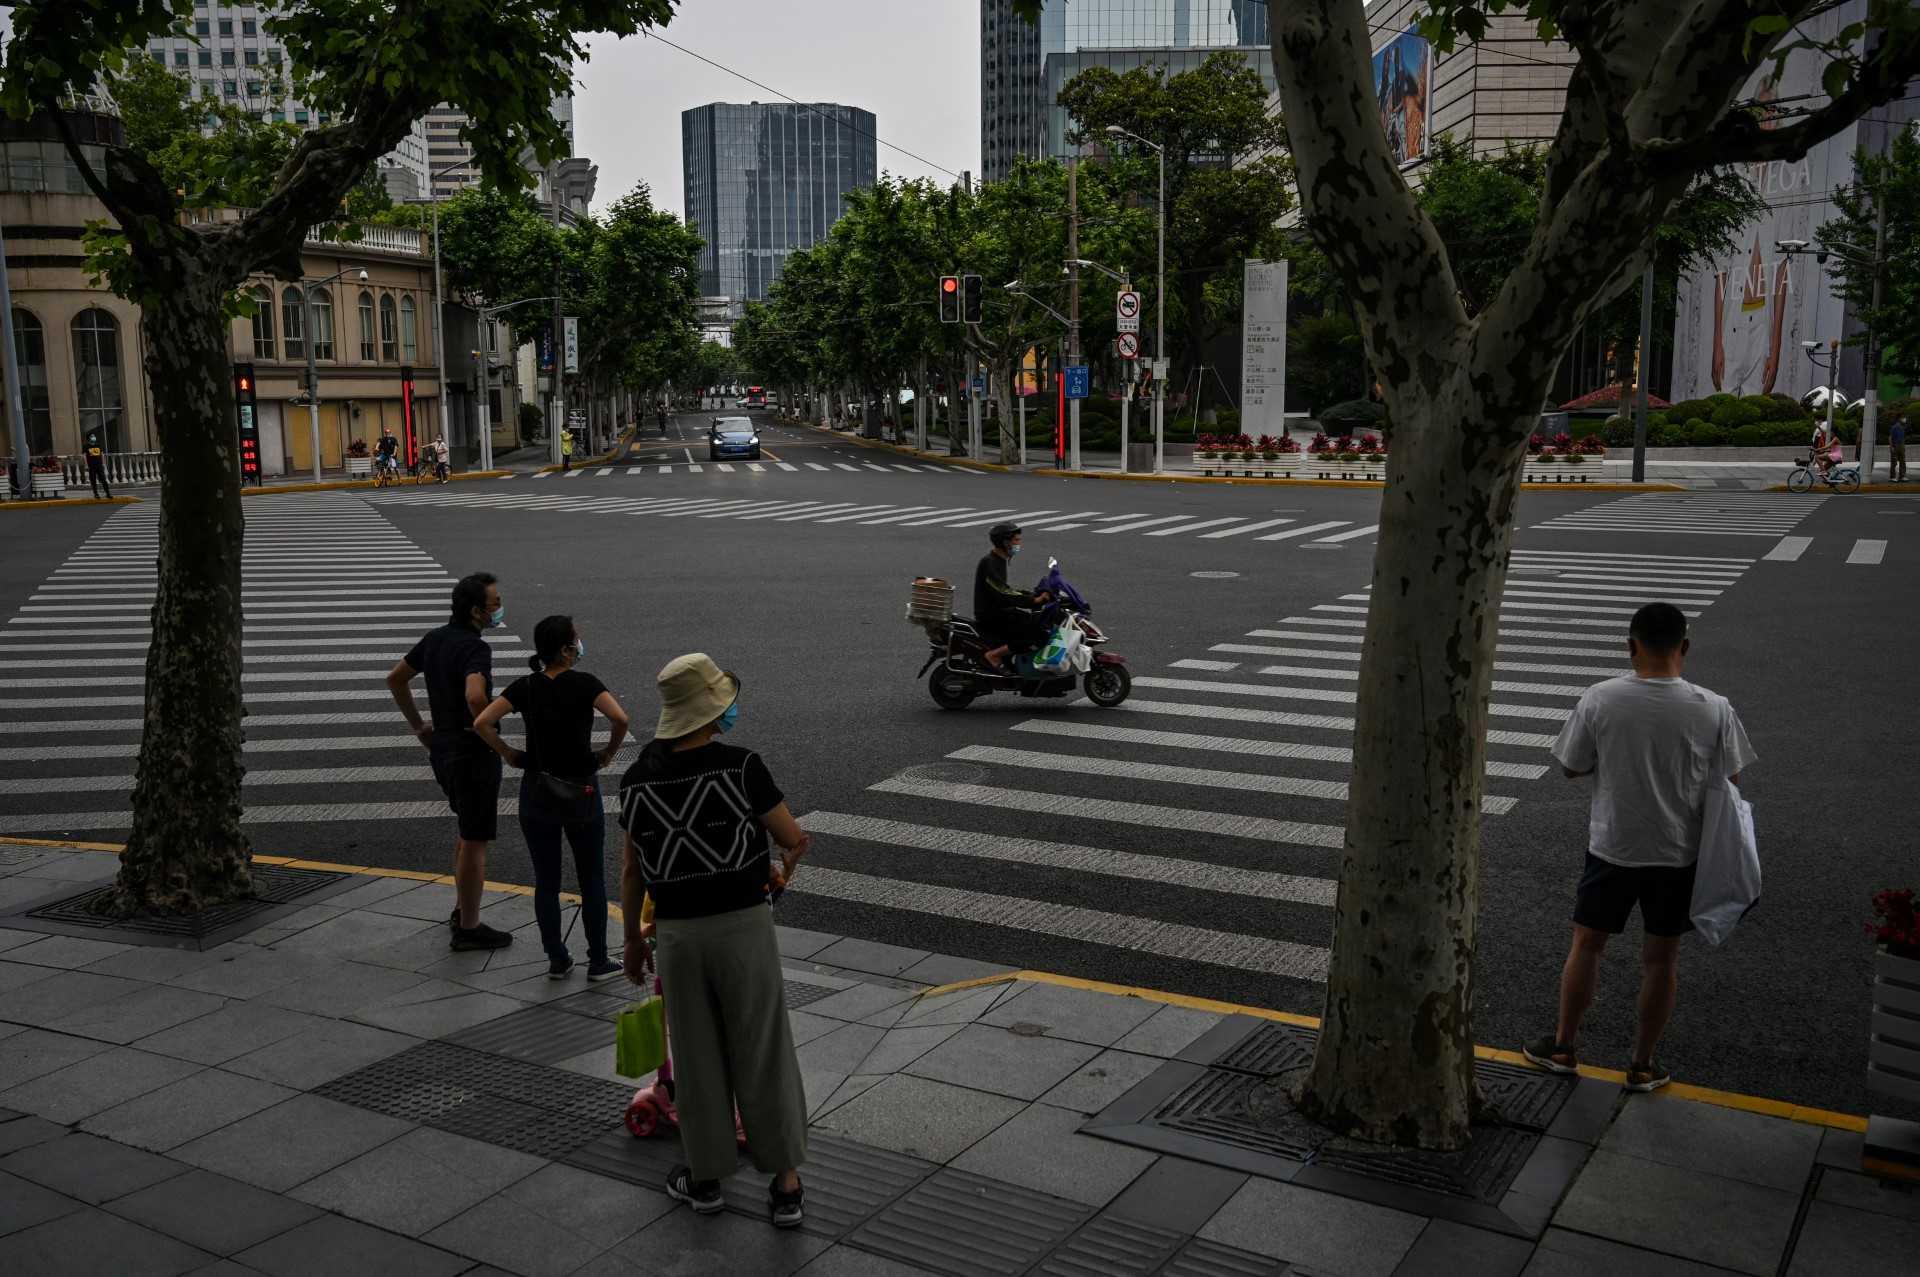 People wait to cross a street during a Covid-19 lockdown in the Jing'an district of Shanghai on May 30. Photo: AFP